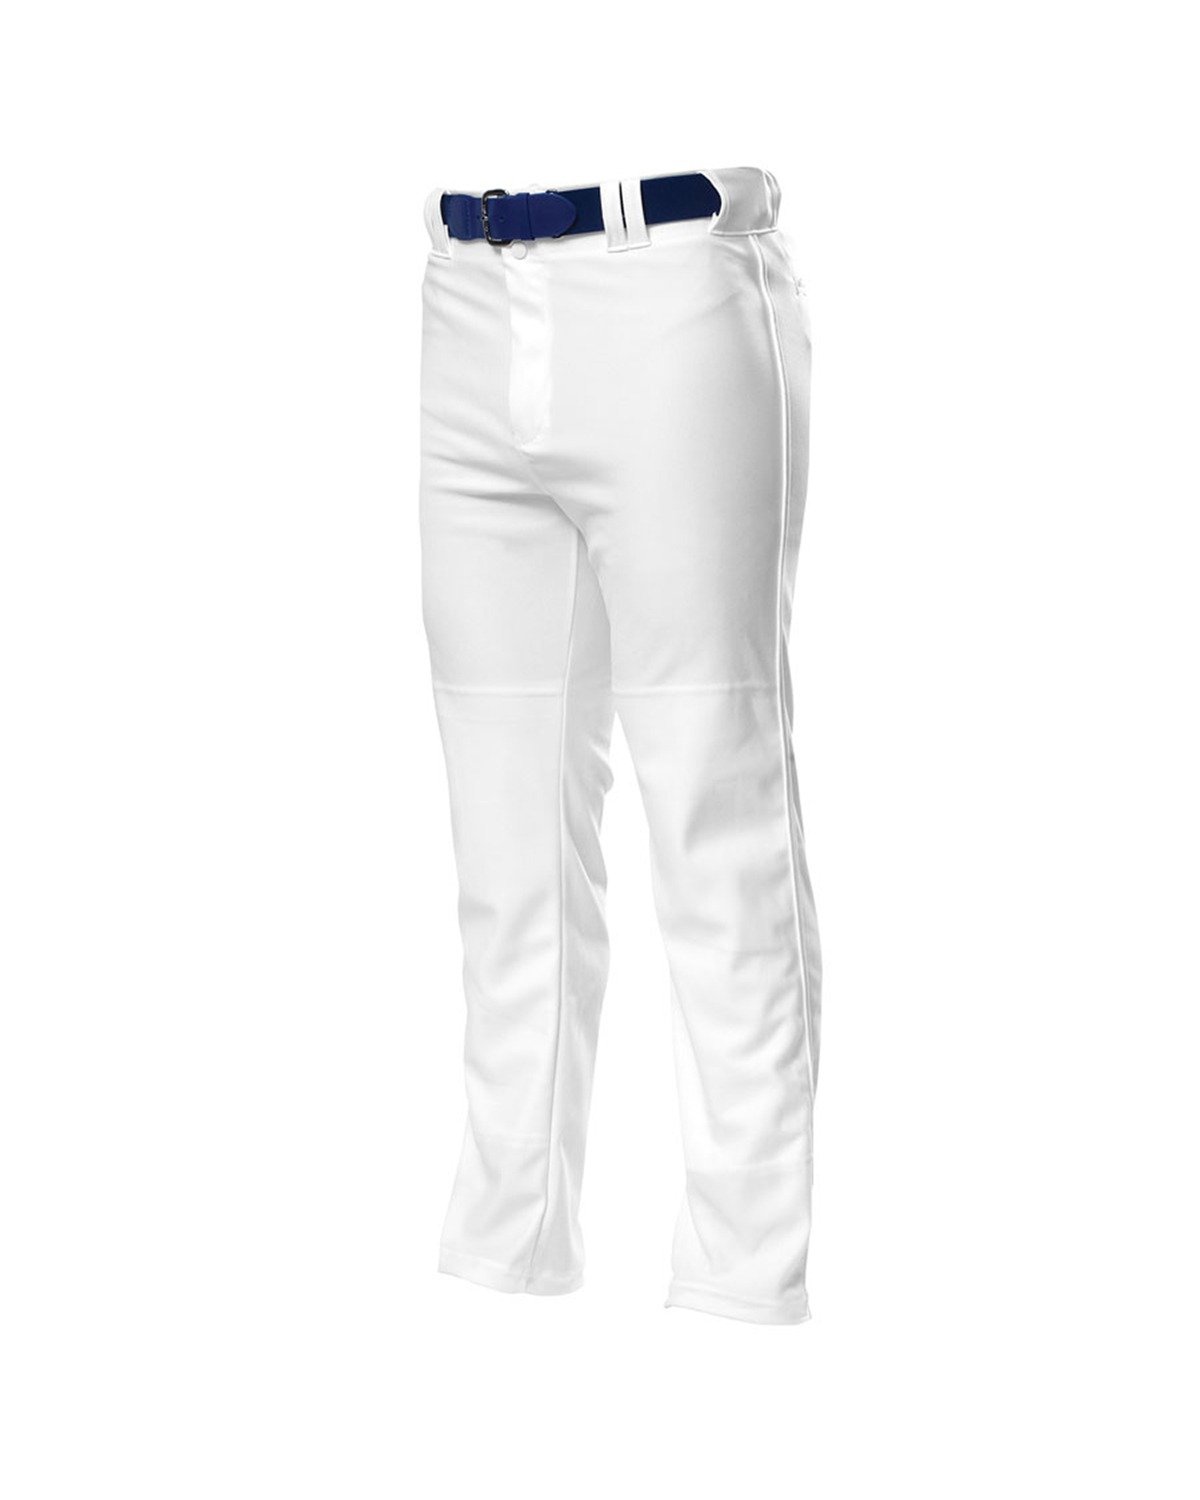 Buy Pro Style Open Bottom Baggy Cut Baseball Pants - A4 Online at Best price